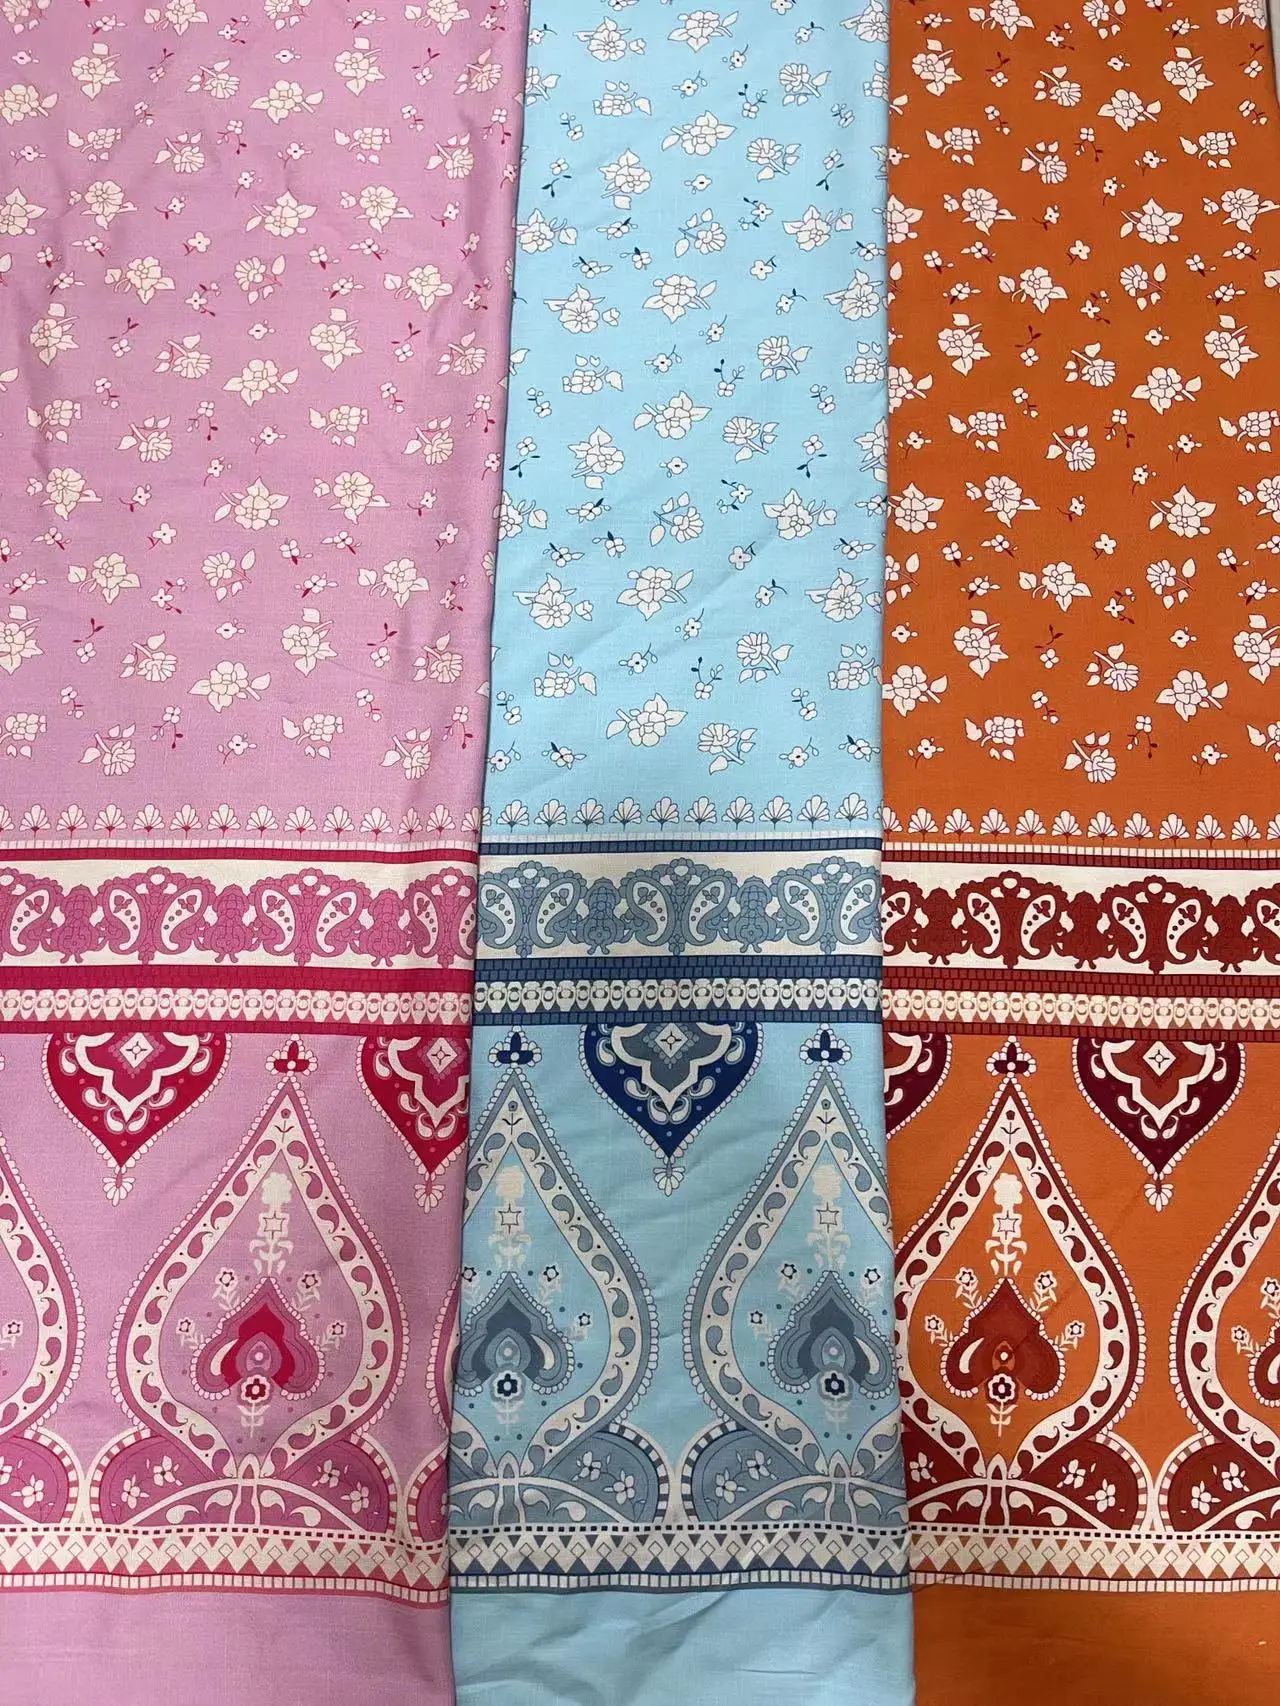 Factory price viscose/polyester fabric print for print fabrics online rayon fabric in pakistan